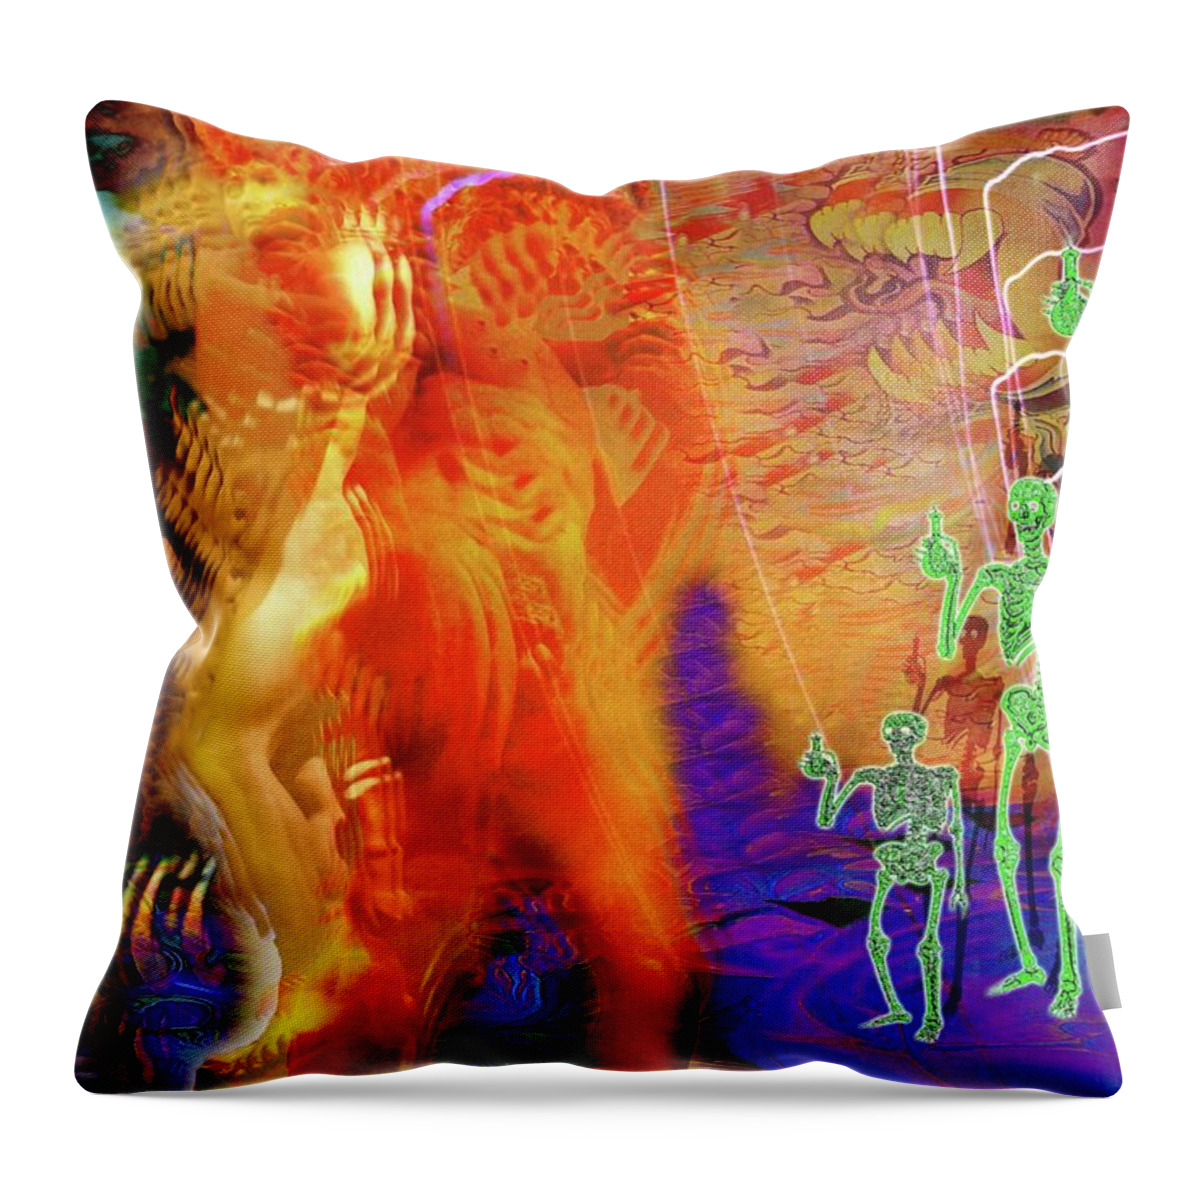 Spiritual Psychedelic Pop Throw Pillow featuring the digital art Radioactive Regeneration Revival by Andrew Chambers